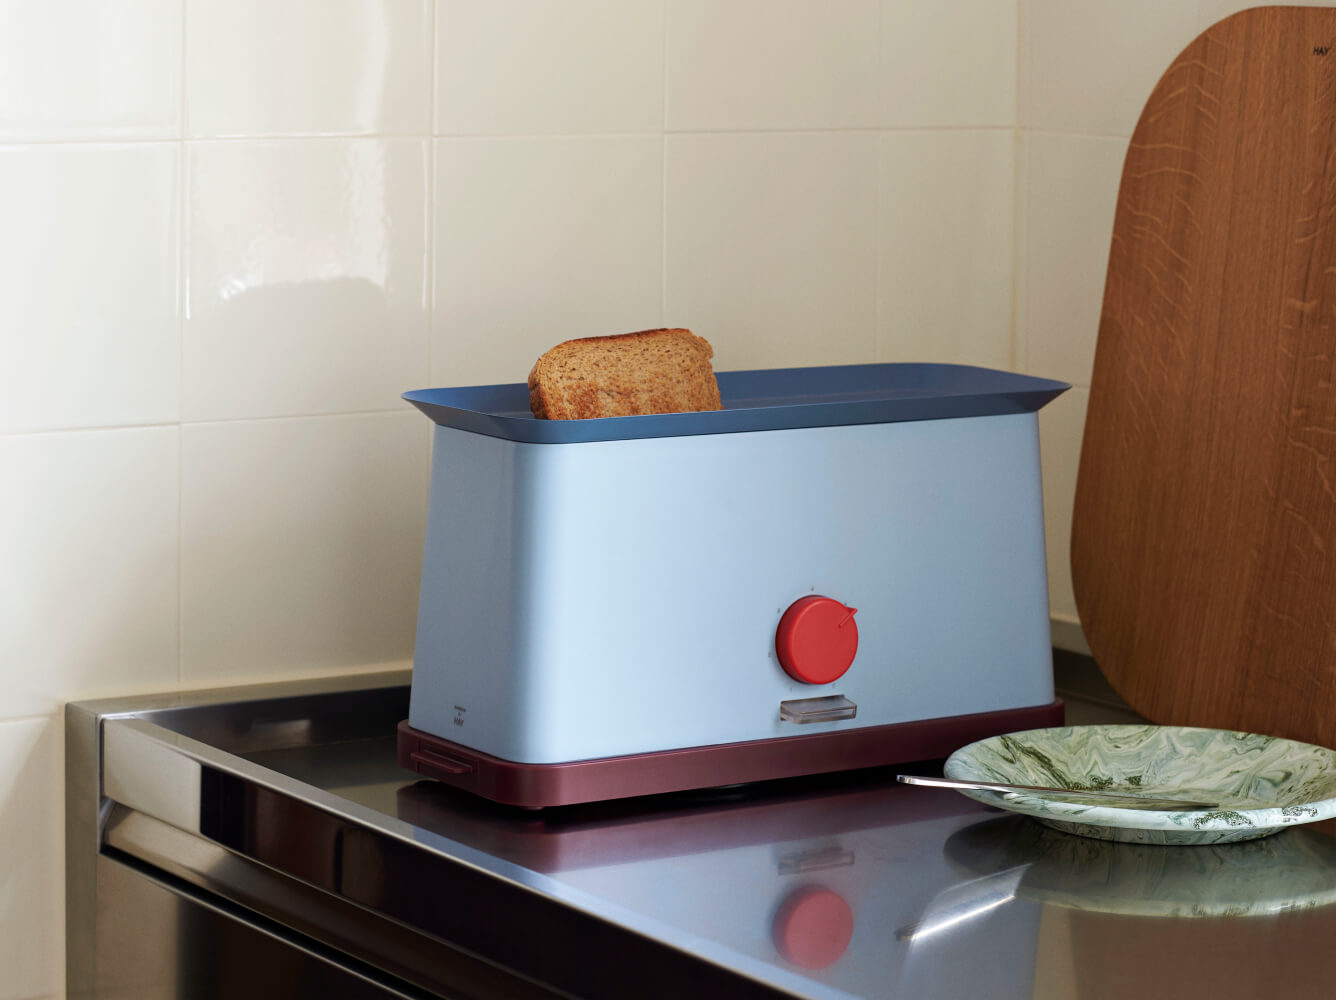 The Sowden Toaster